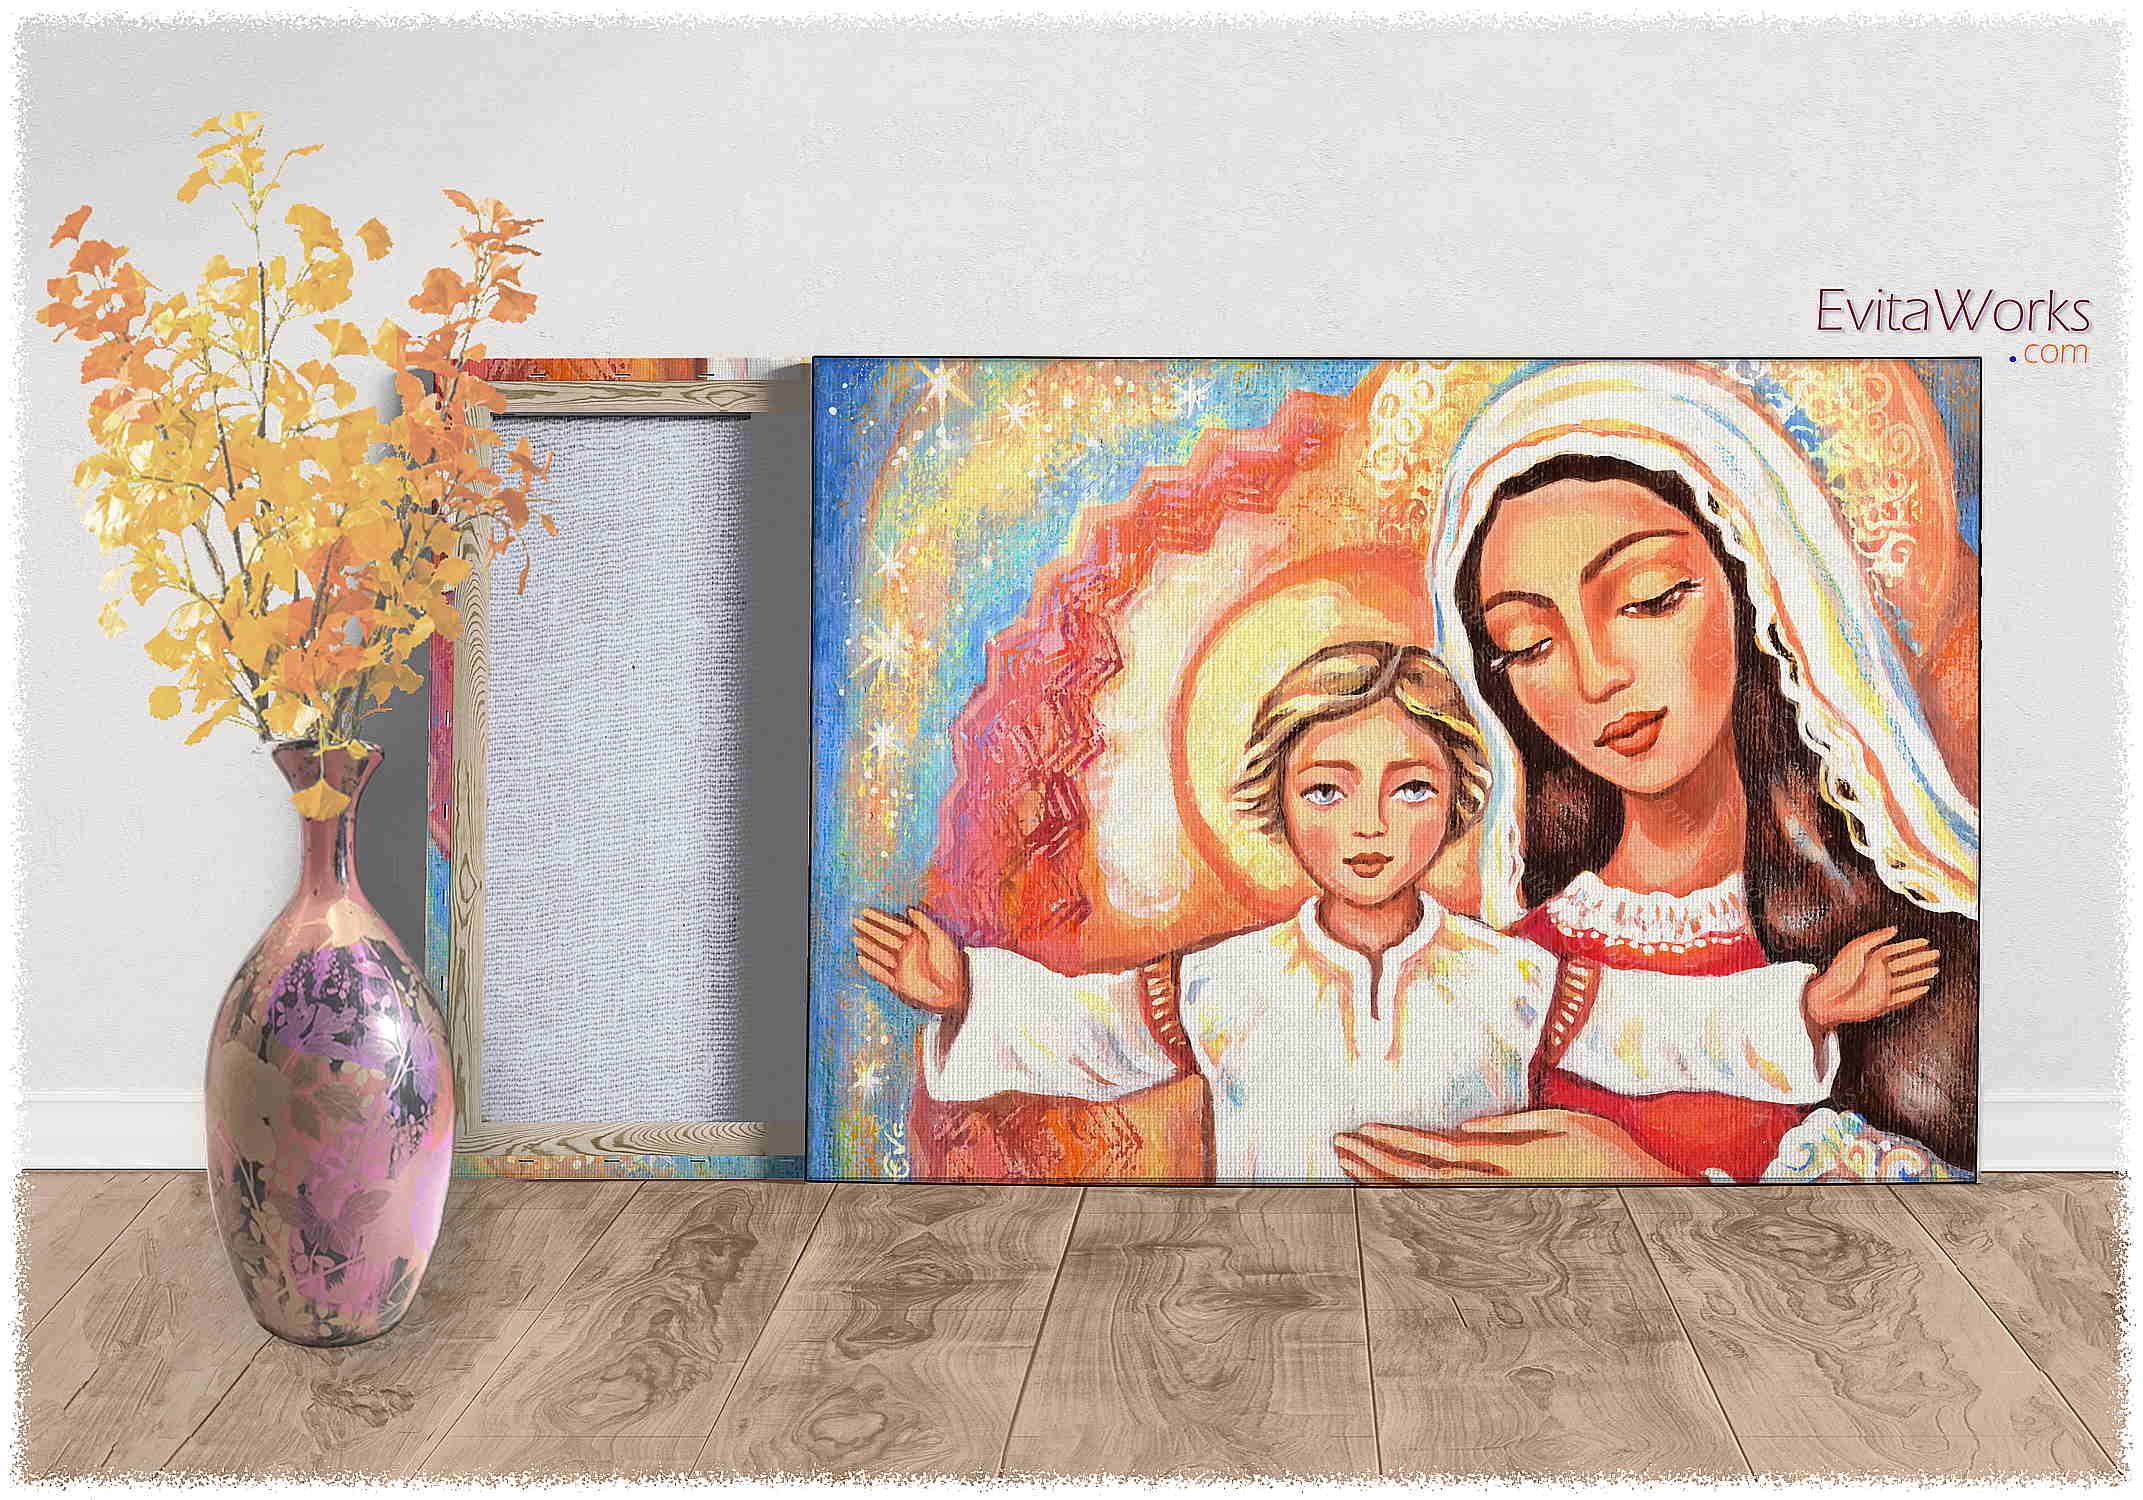 Hit to learn about "Gate to Heaven, mother and child" on canvases